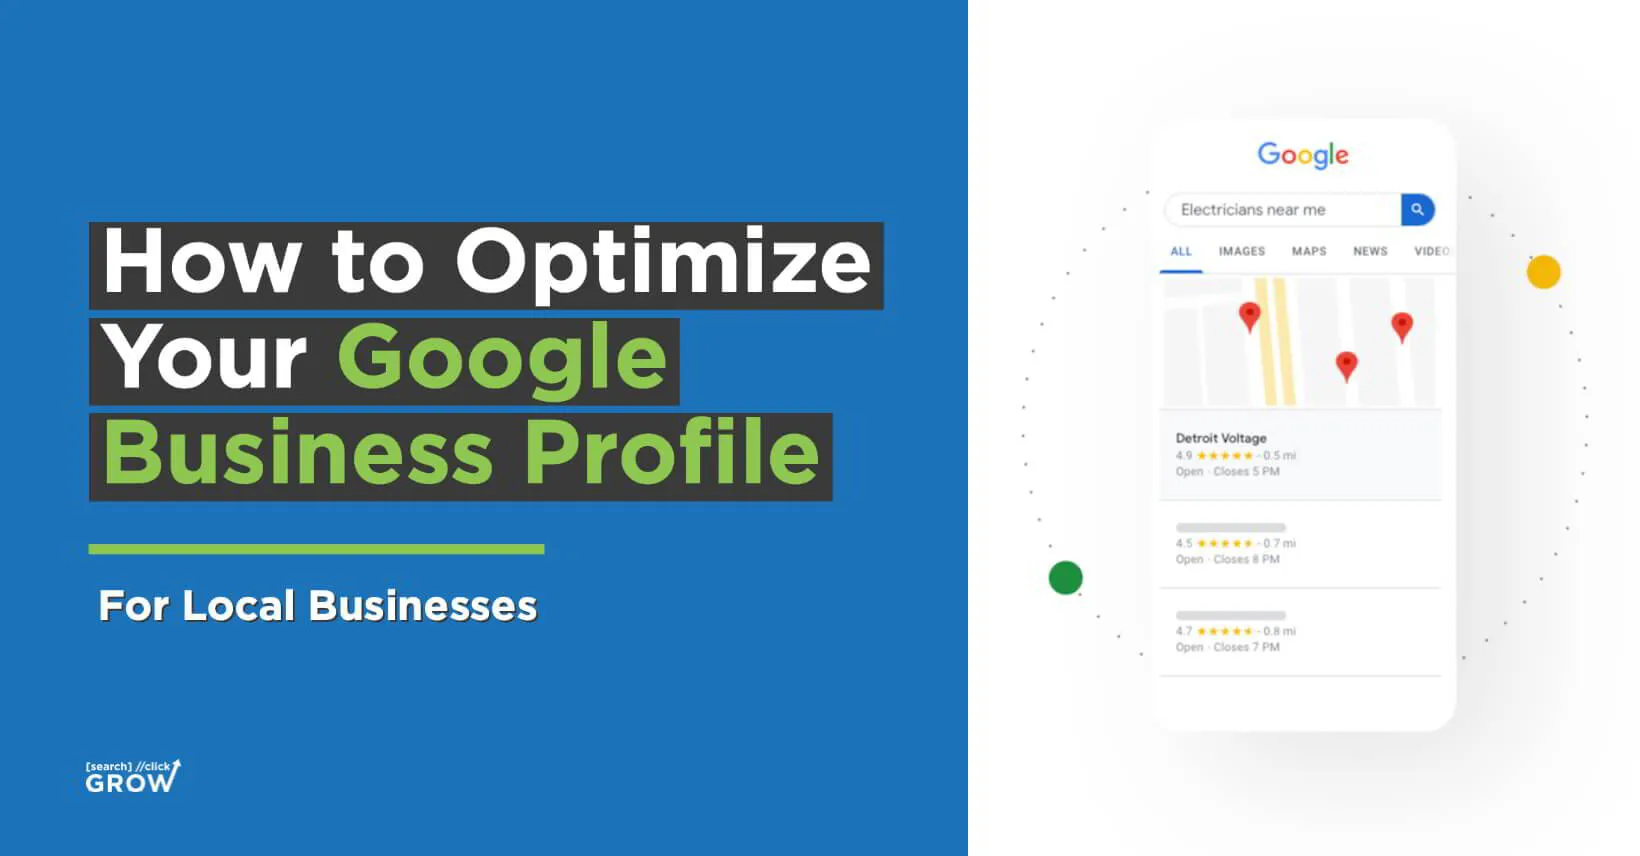 How to Optimize Your Google Business Profile for Local Businesses